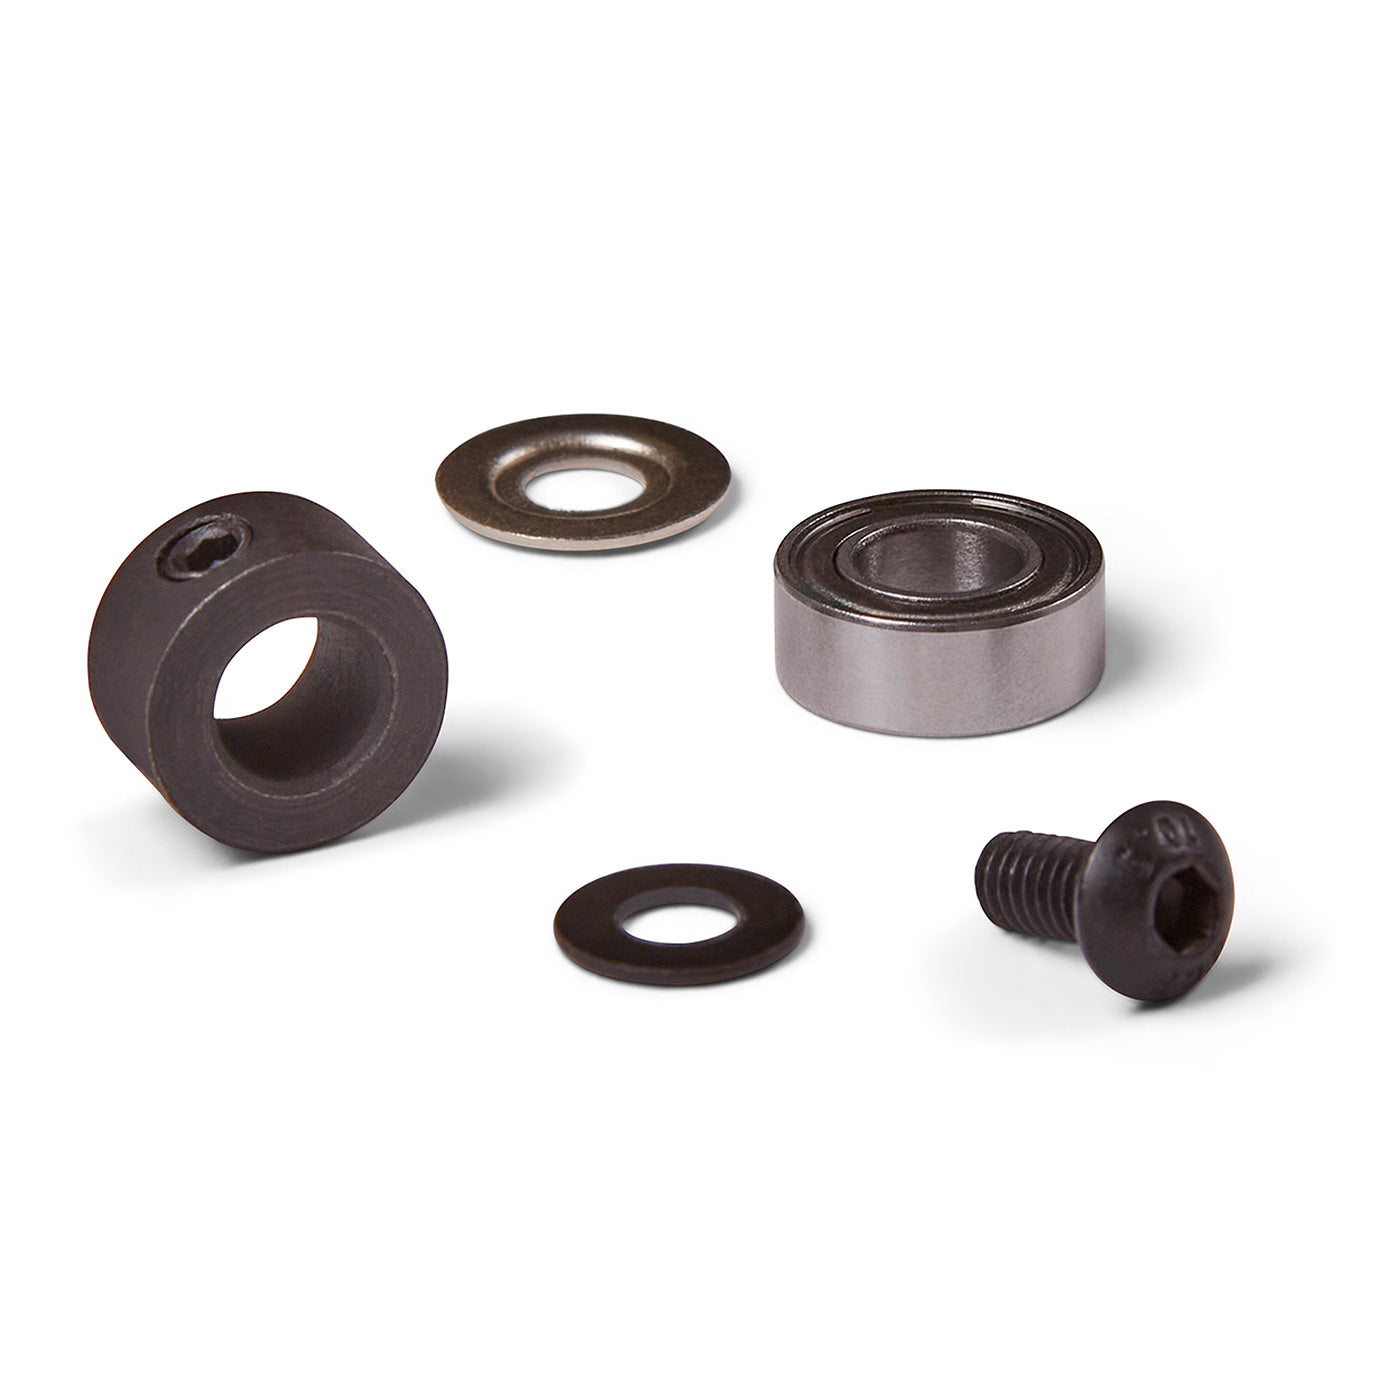 Bearing Kit for R5509, R5531, R5532, R5533, R5534, R5795, R5796, R5816 and R5867  